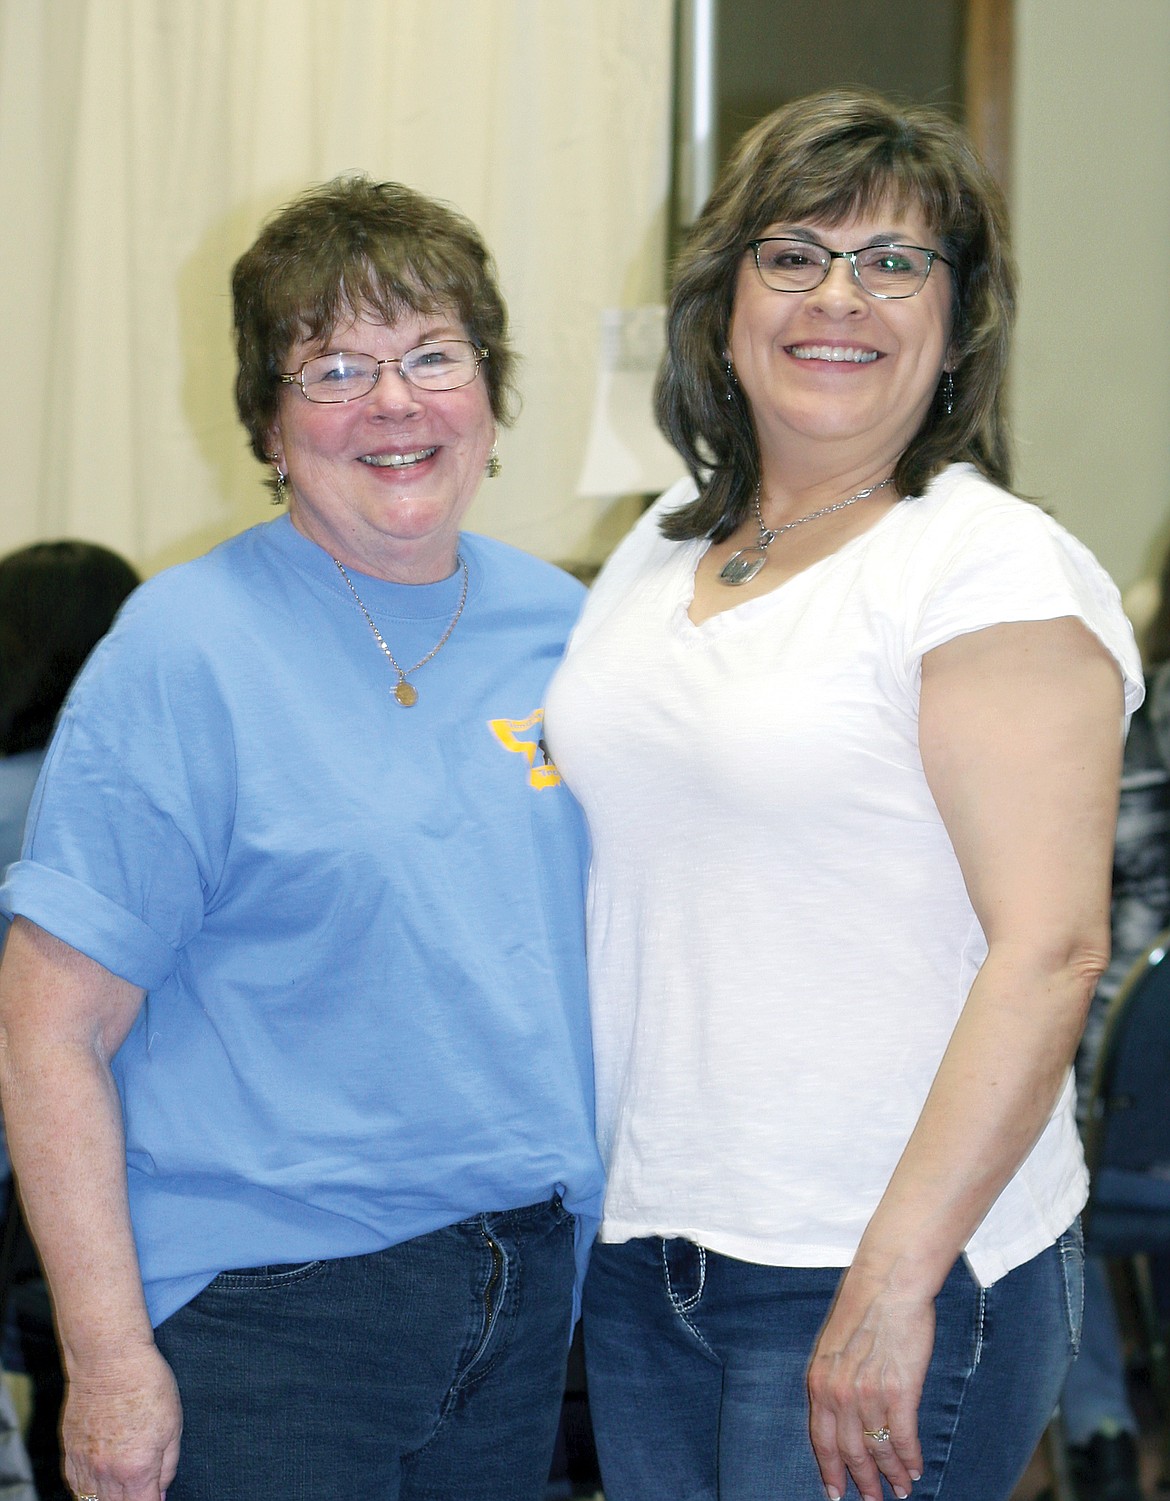 Tender Lovin Quilters members Kathleen Pierce, left, and Tammy Anderson at quilting 101. (Elka Wood/TWN)